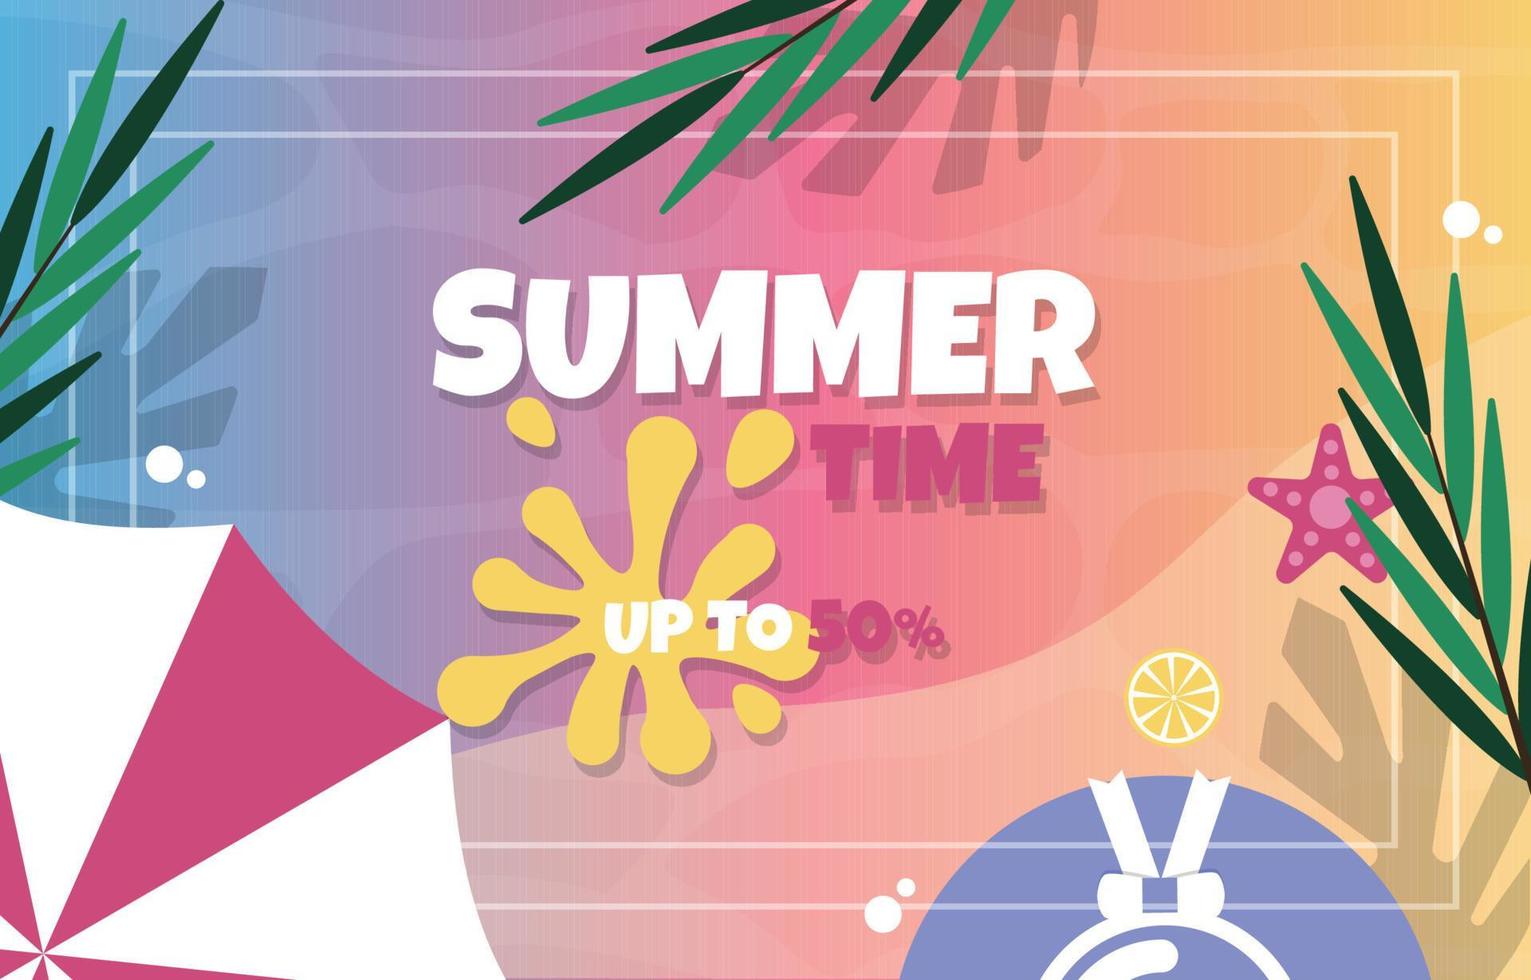 Sea Beach Summer Sale Holiday Event Promotion Poster Template vector